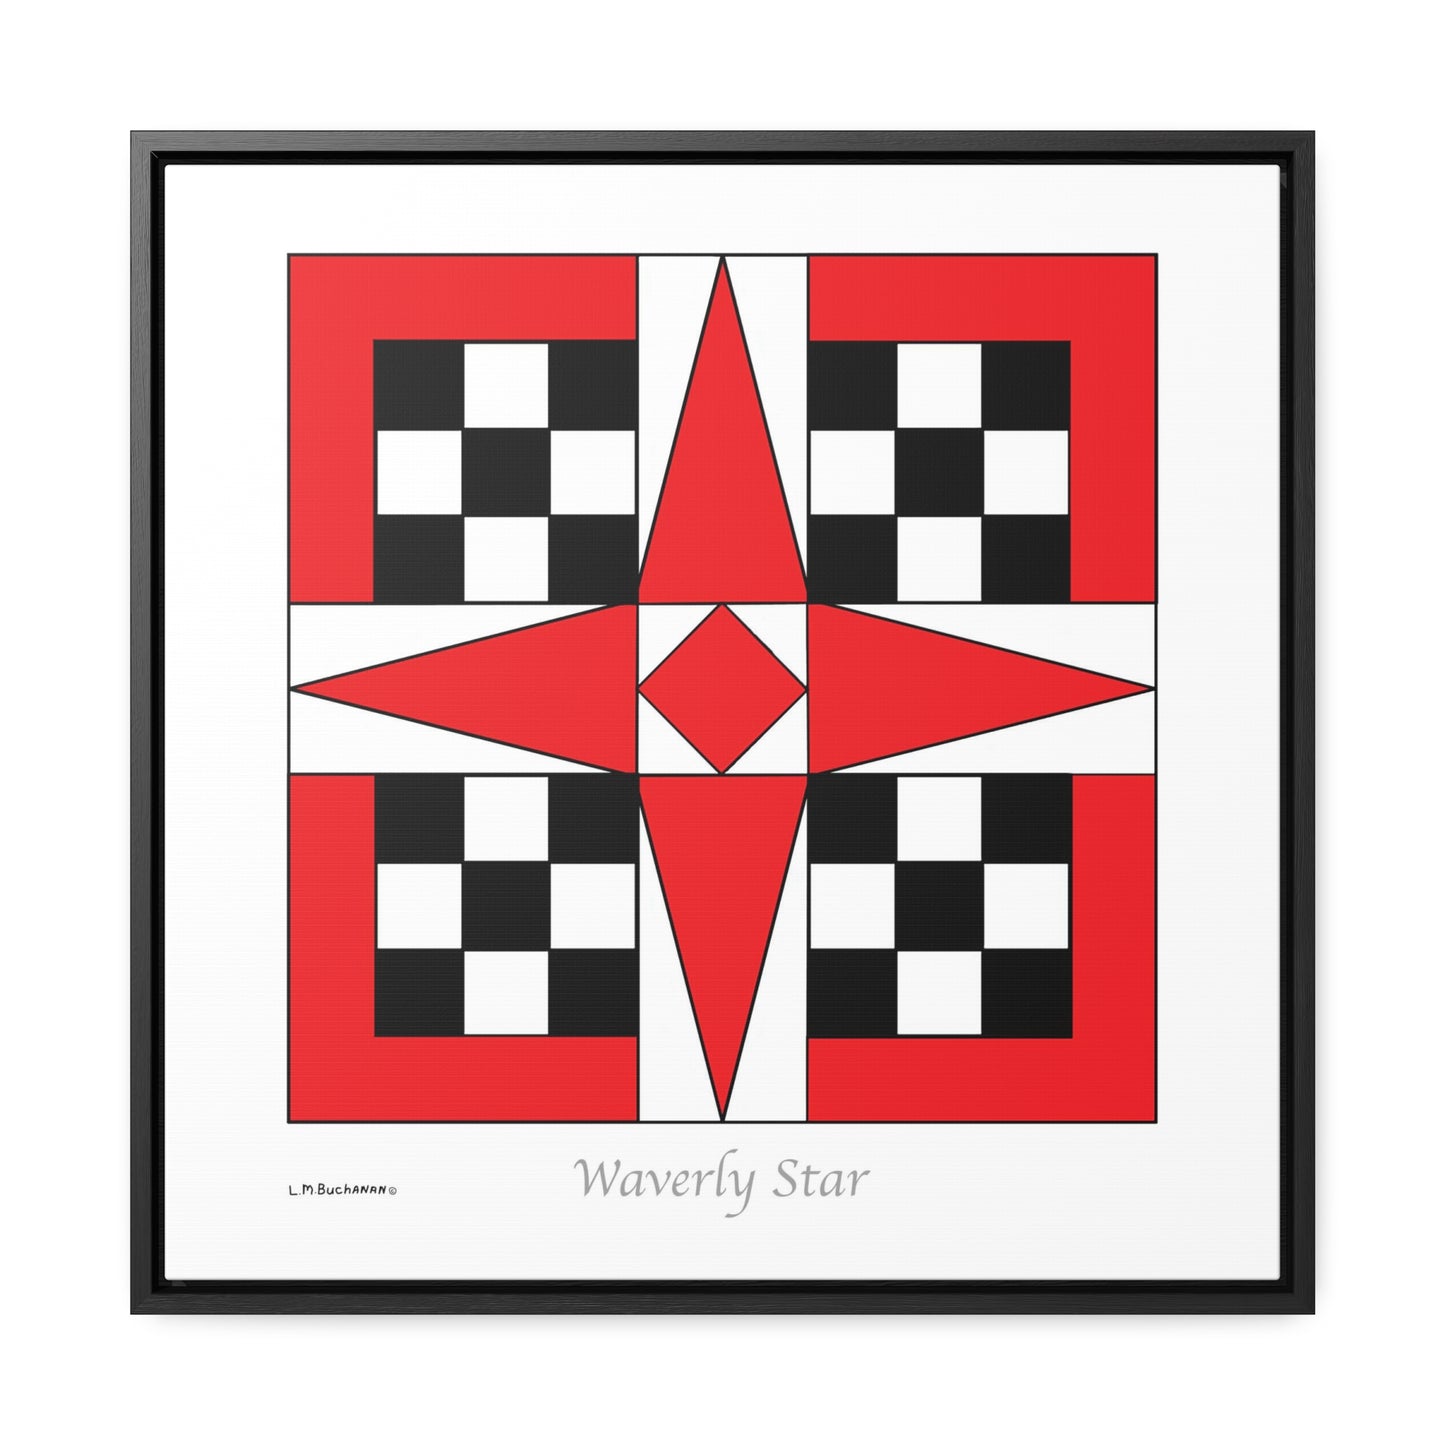 The Waverly Star Quilt Design Gallery Canvas Wrap is a reproduction of a fine art design by artist Lee M. Buchanan. This design is usually listed in the Five Patch Quilt Pattern Group and is a bold design in black, red and white. If you love quilting and appreciate its craftsmanship, add the Waverly Star Quilt Design Gallery Canvas Wrap to you art collection today!